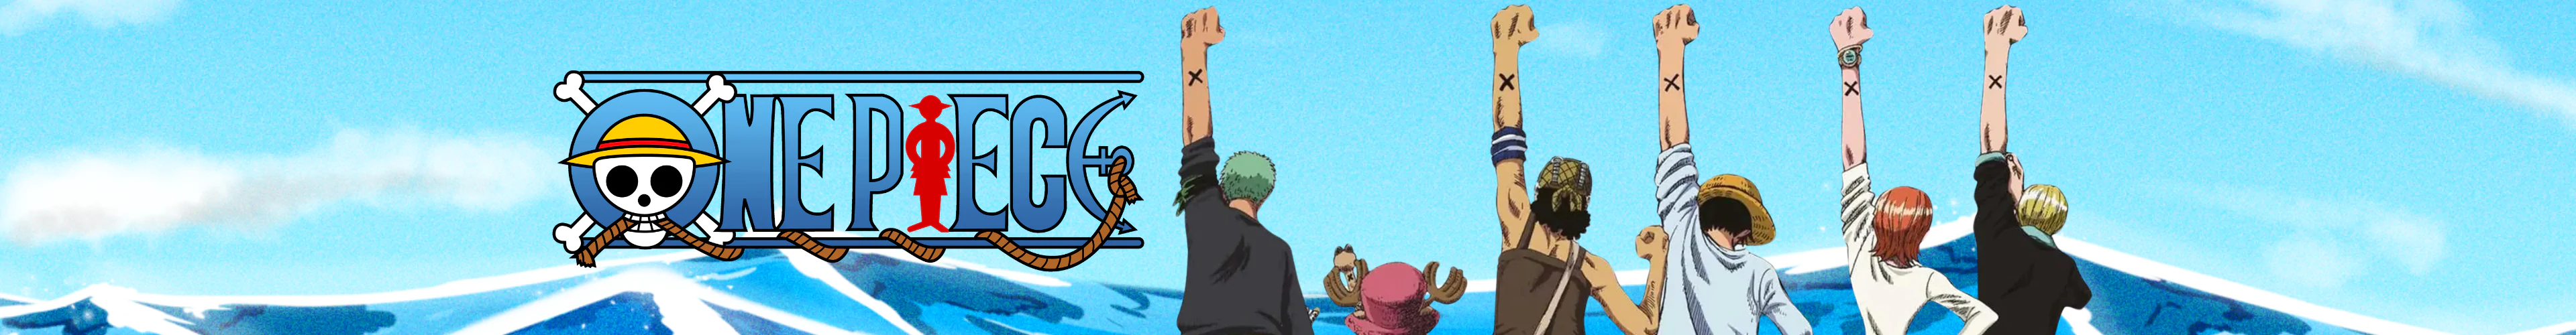 One Piece relief magnets banner